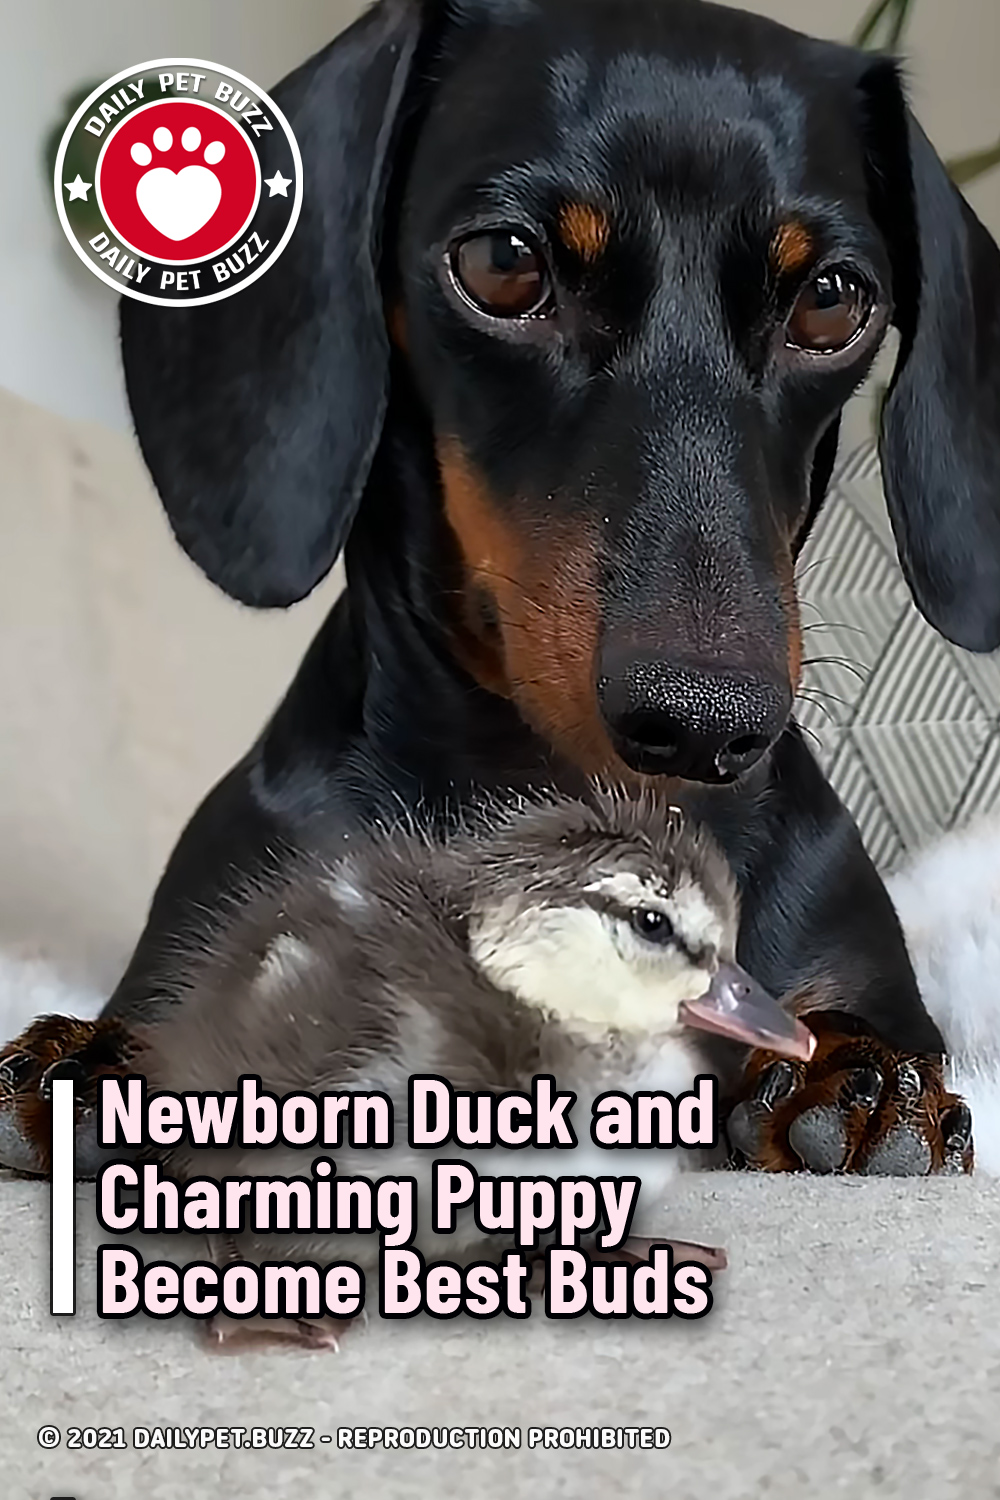 Newborn Duck and Charming Puppy Become Best Buds